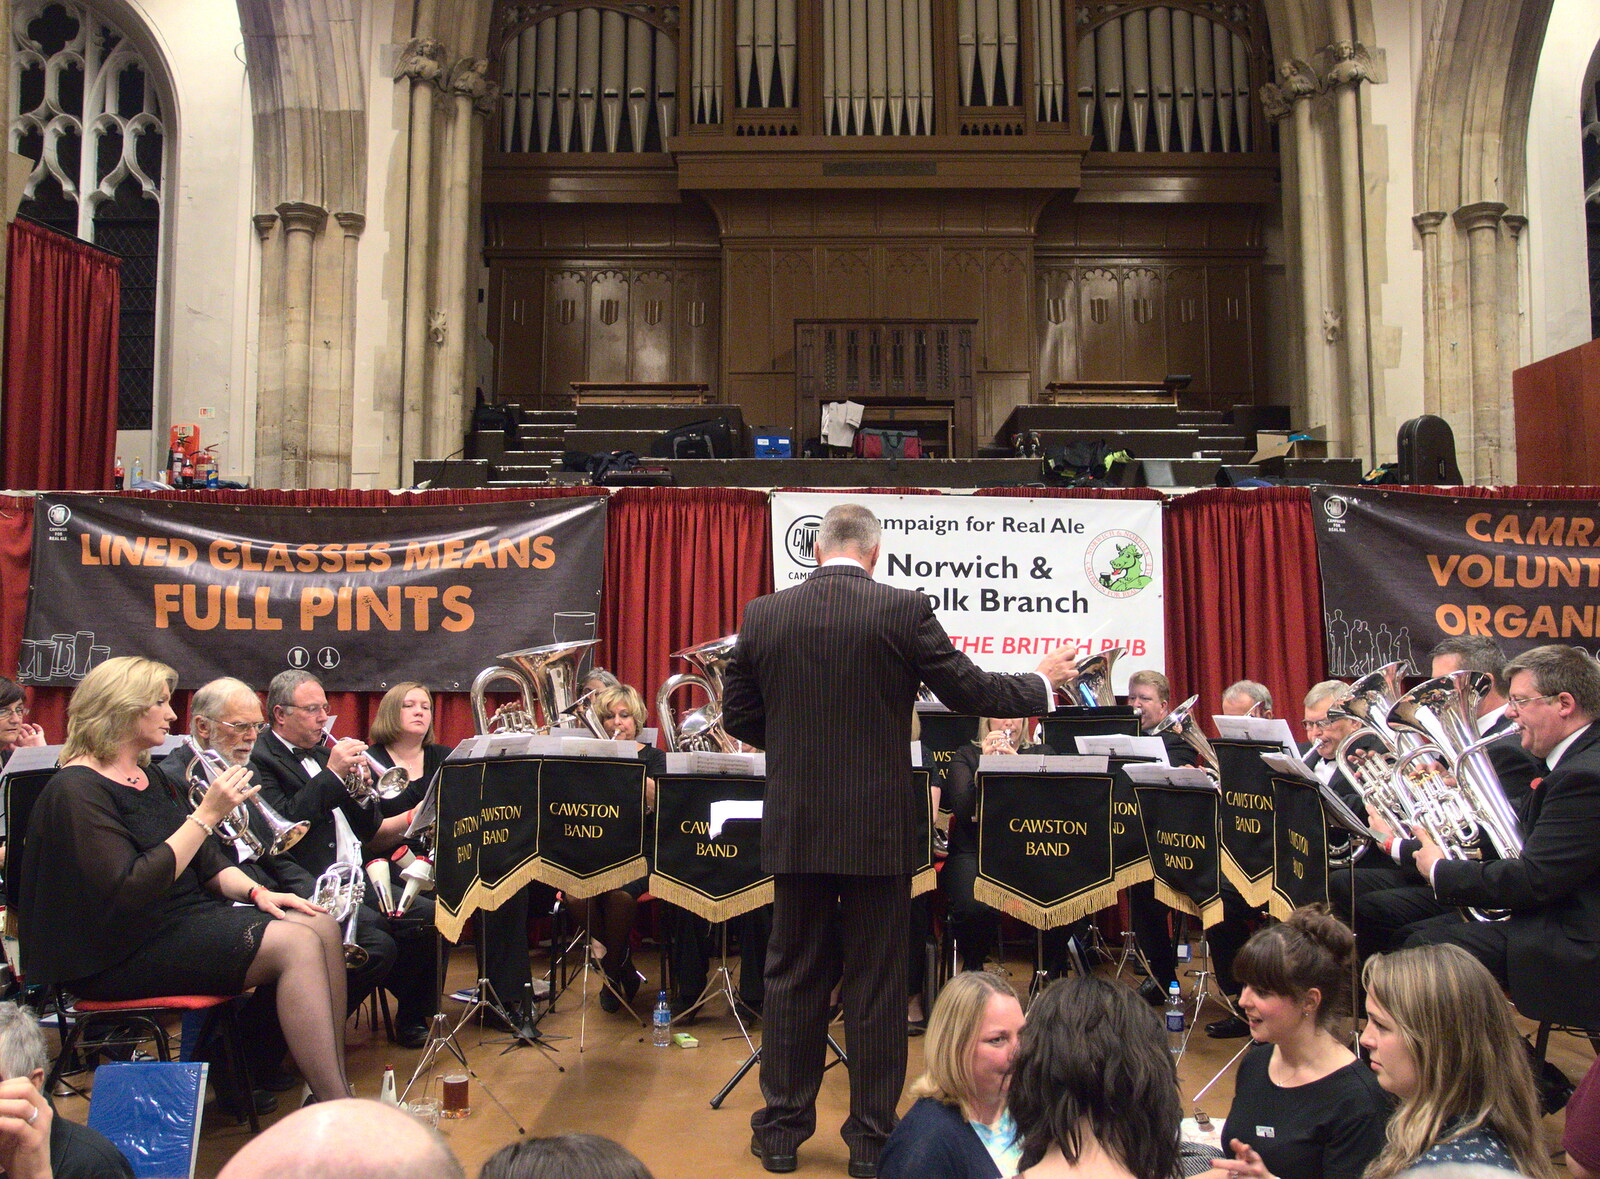 The Cawston Silver Band does its thing from The 38th Norwich Beer Festival, Norwich, Norfolk - 28th October 2015